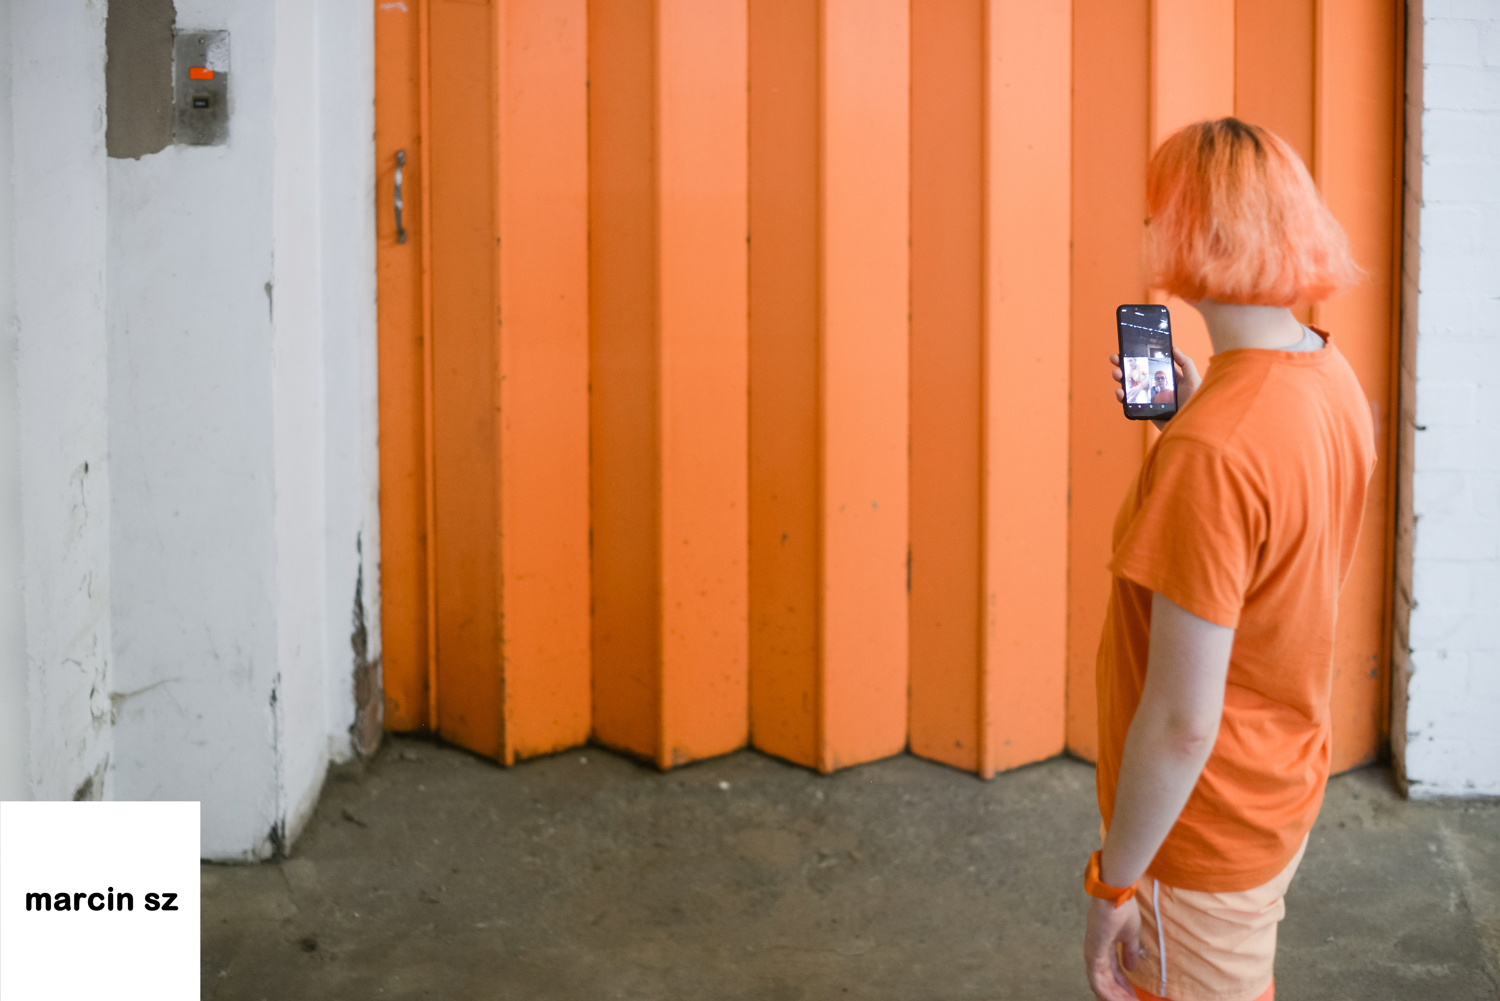 Emily R faces away from the camera, dressed in orange in front of a large orange shutter door. She looks at a phone screen on a call.